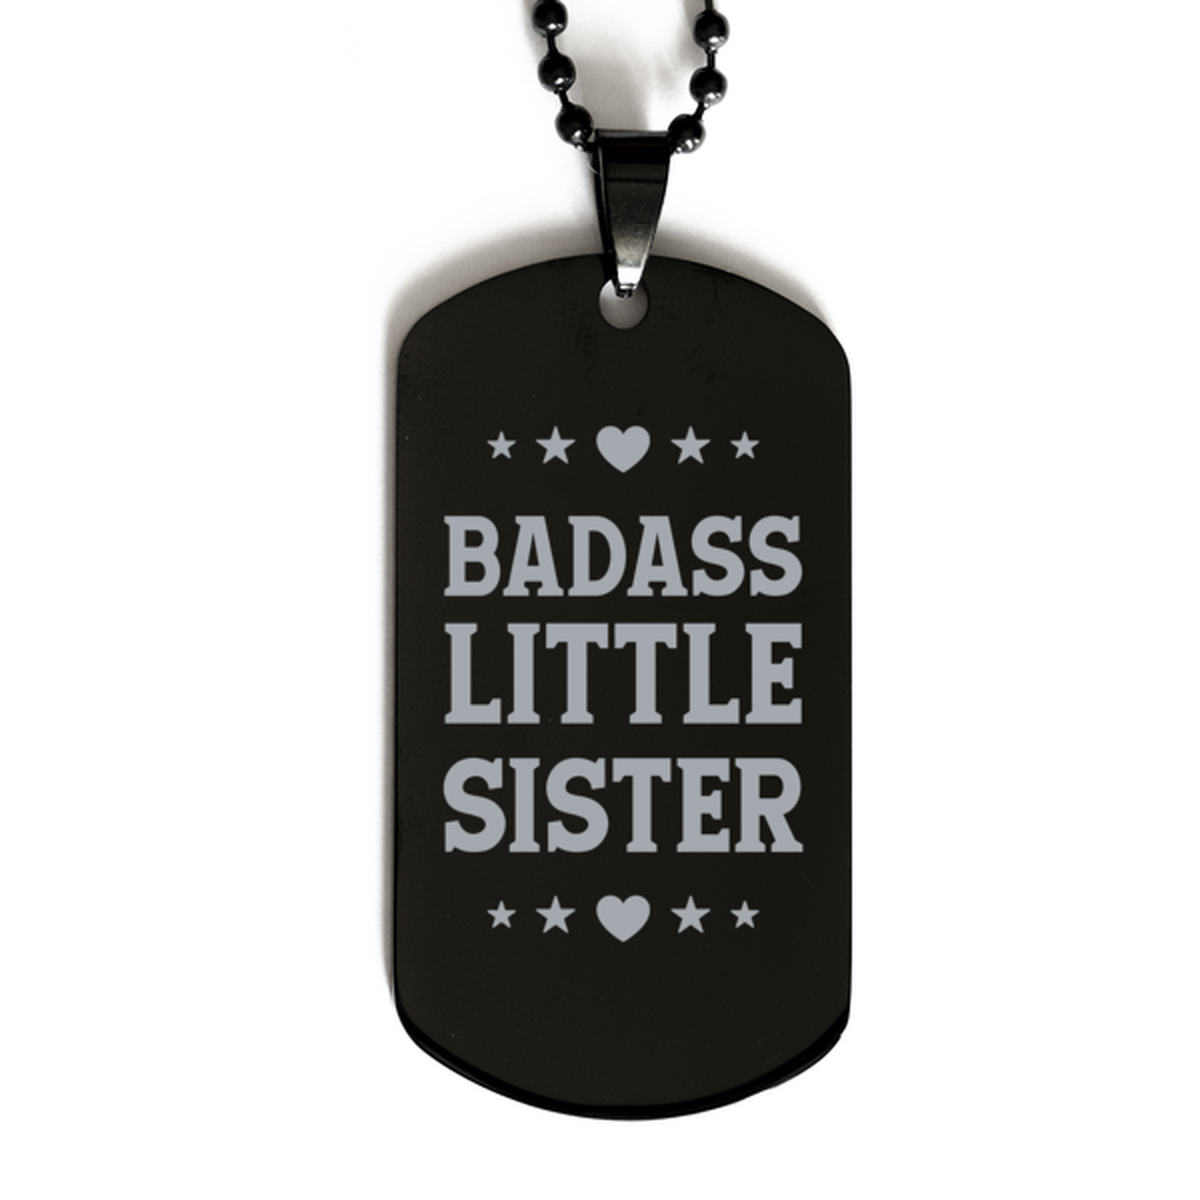 Little Sister Black Dog Tag, Badass Little Sister, Funny Family Gifts  Necklace For Little Sister From Brother Sister